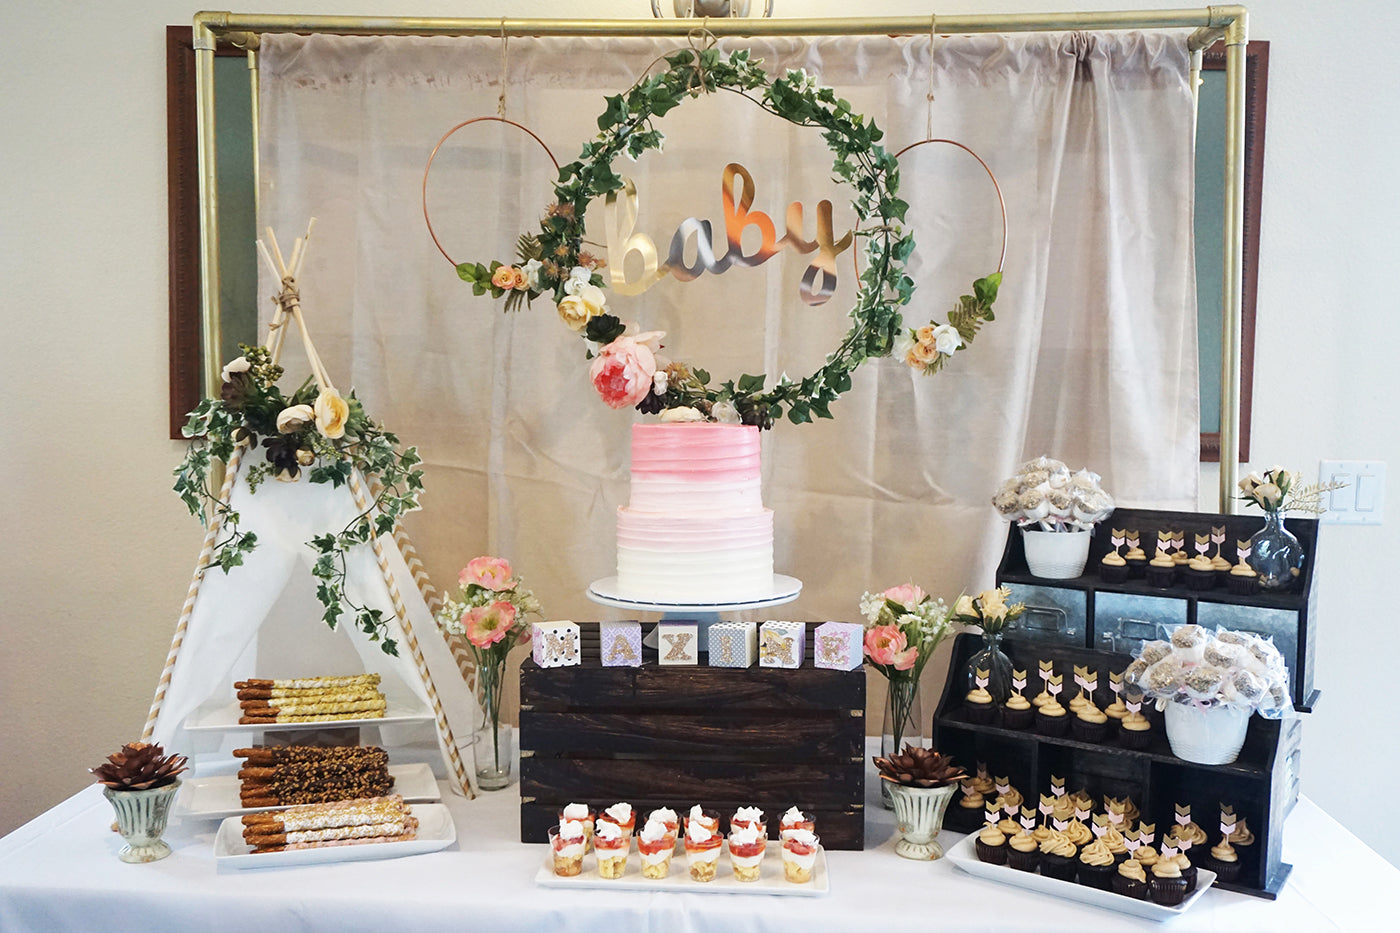 10 Adorable Baby Shower Themes to Welcome Your New Arrival